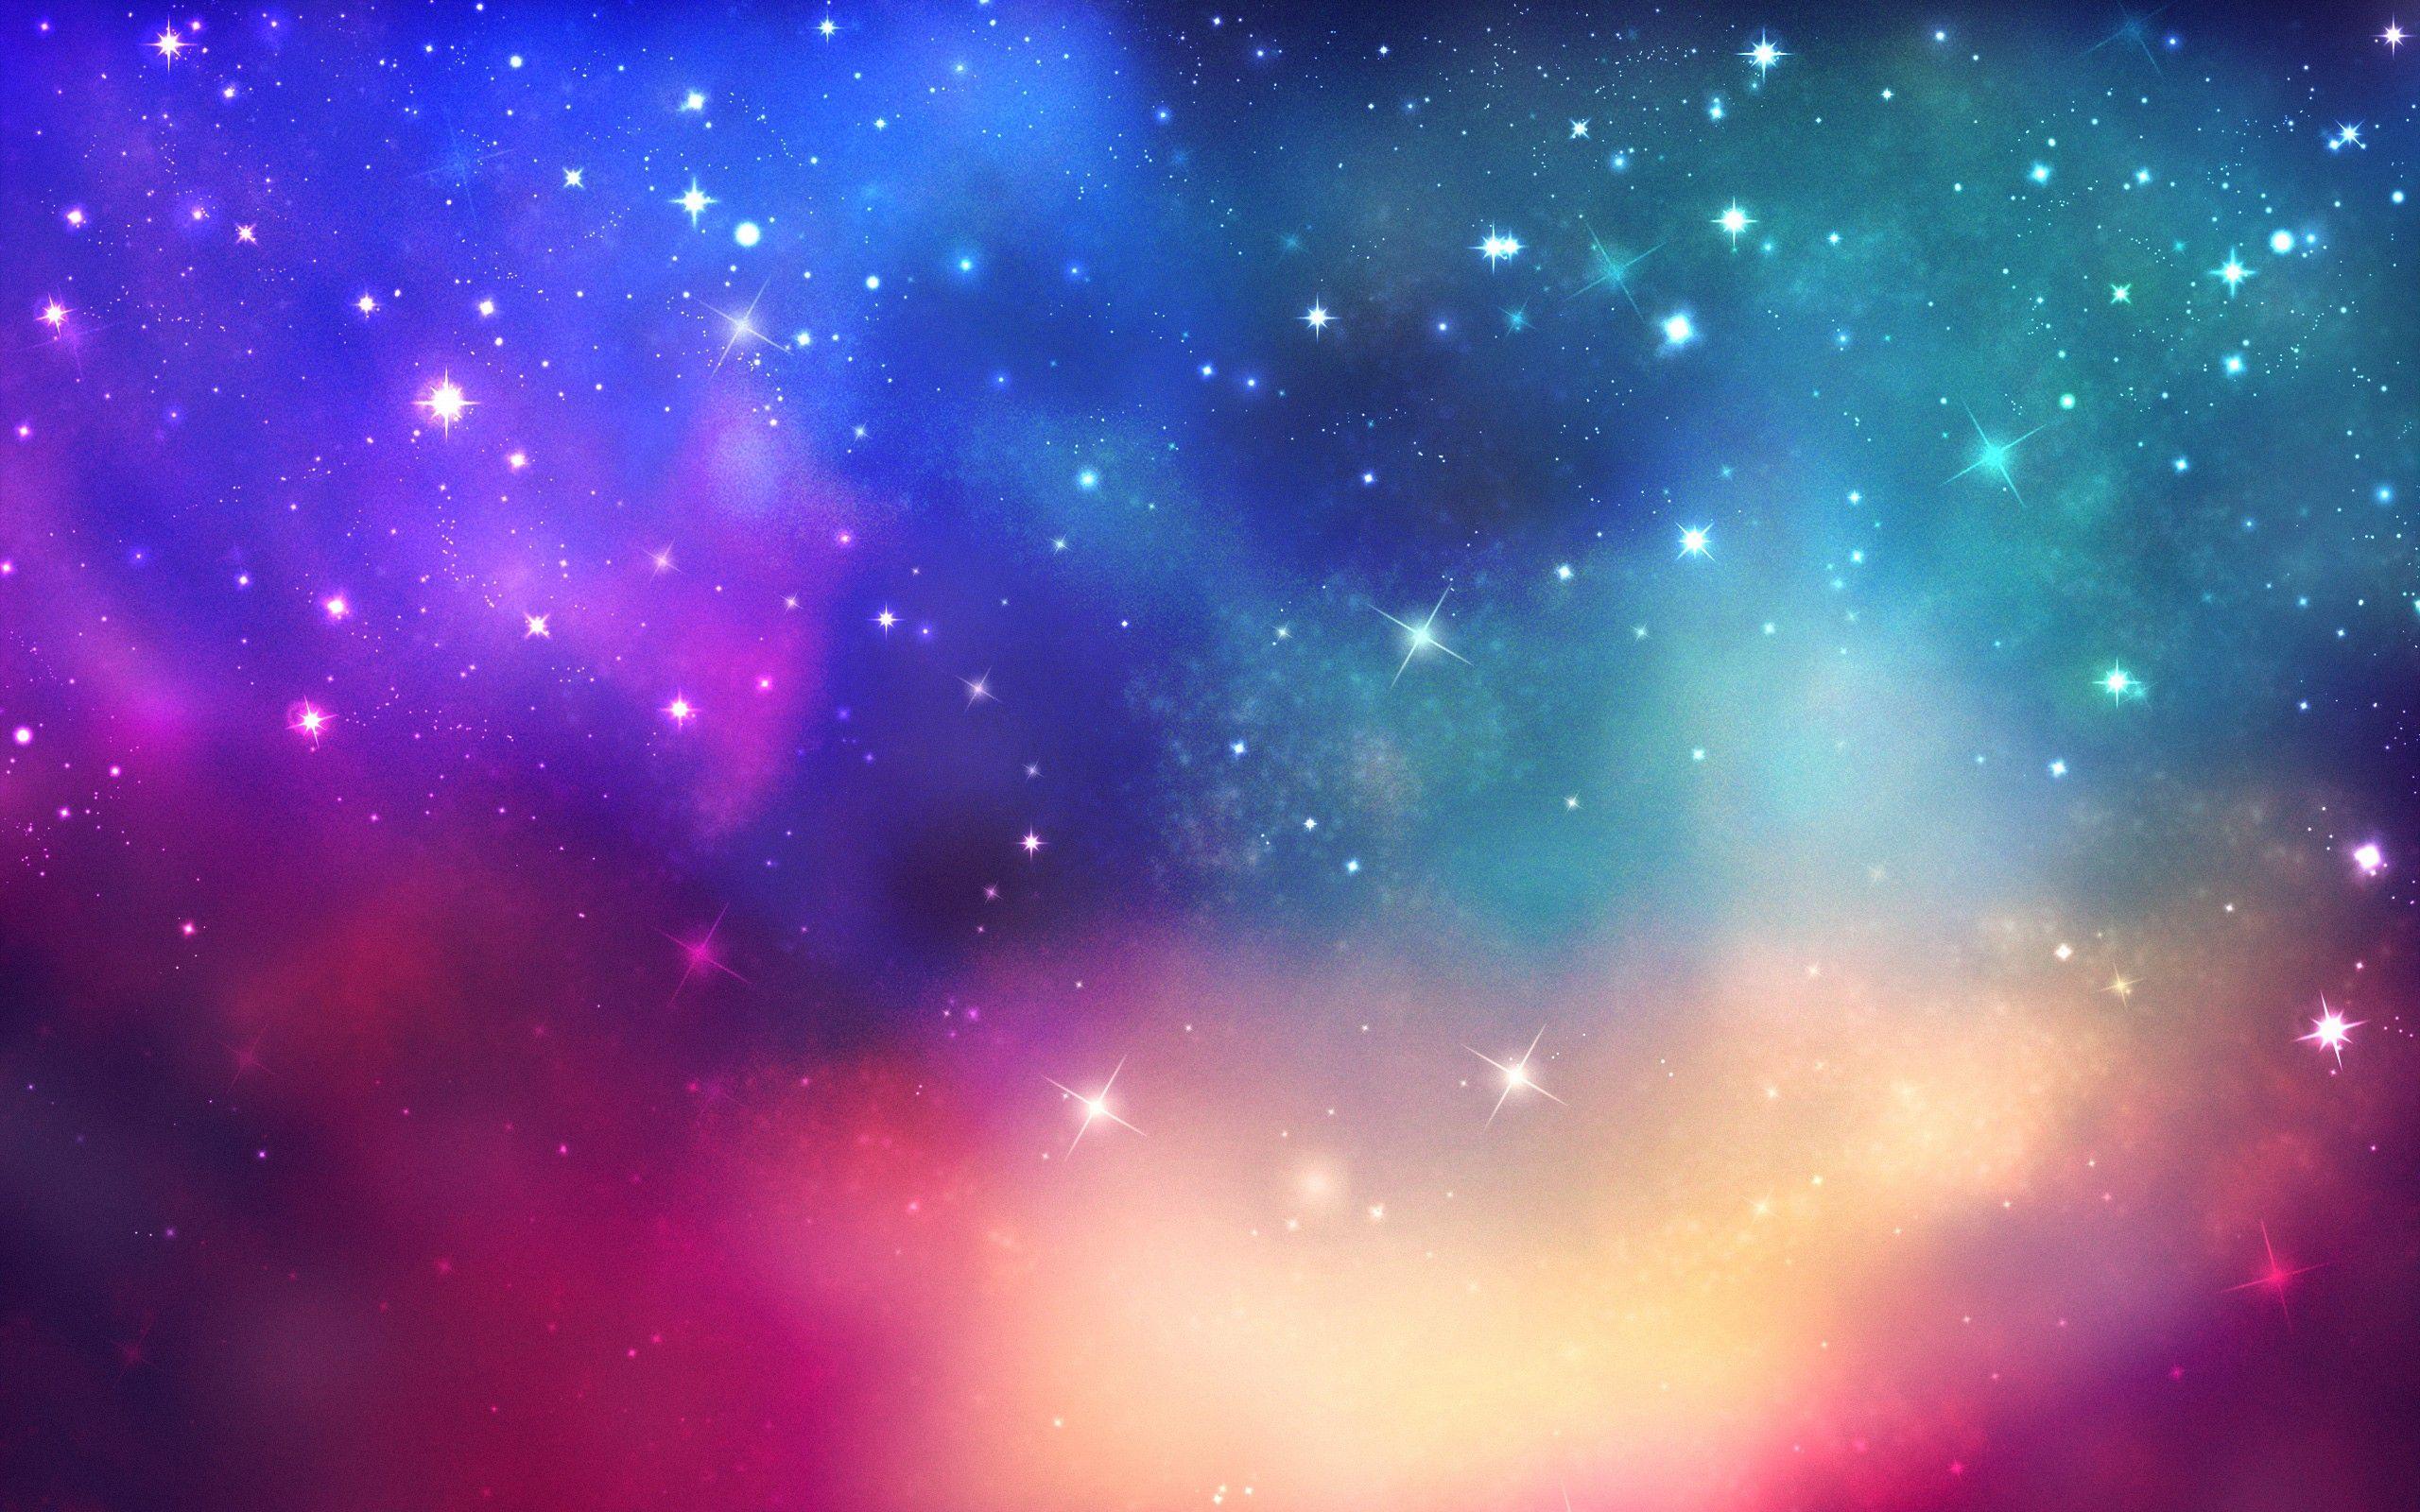 Outer Space backgroundDownload free HD background for desktop